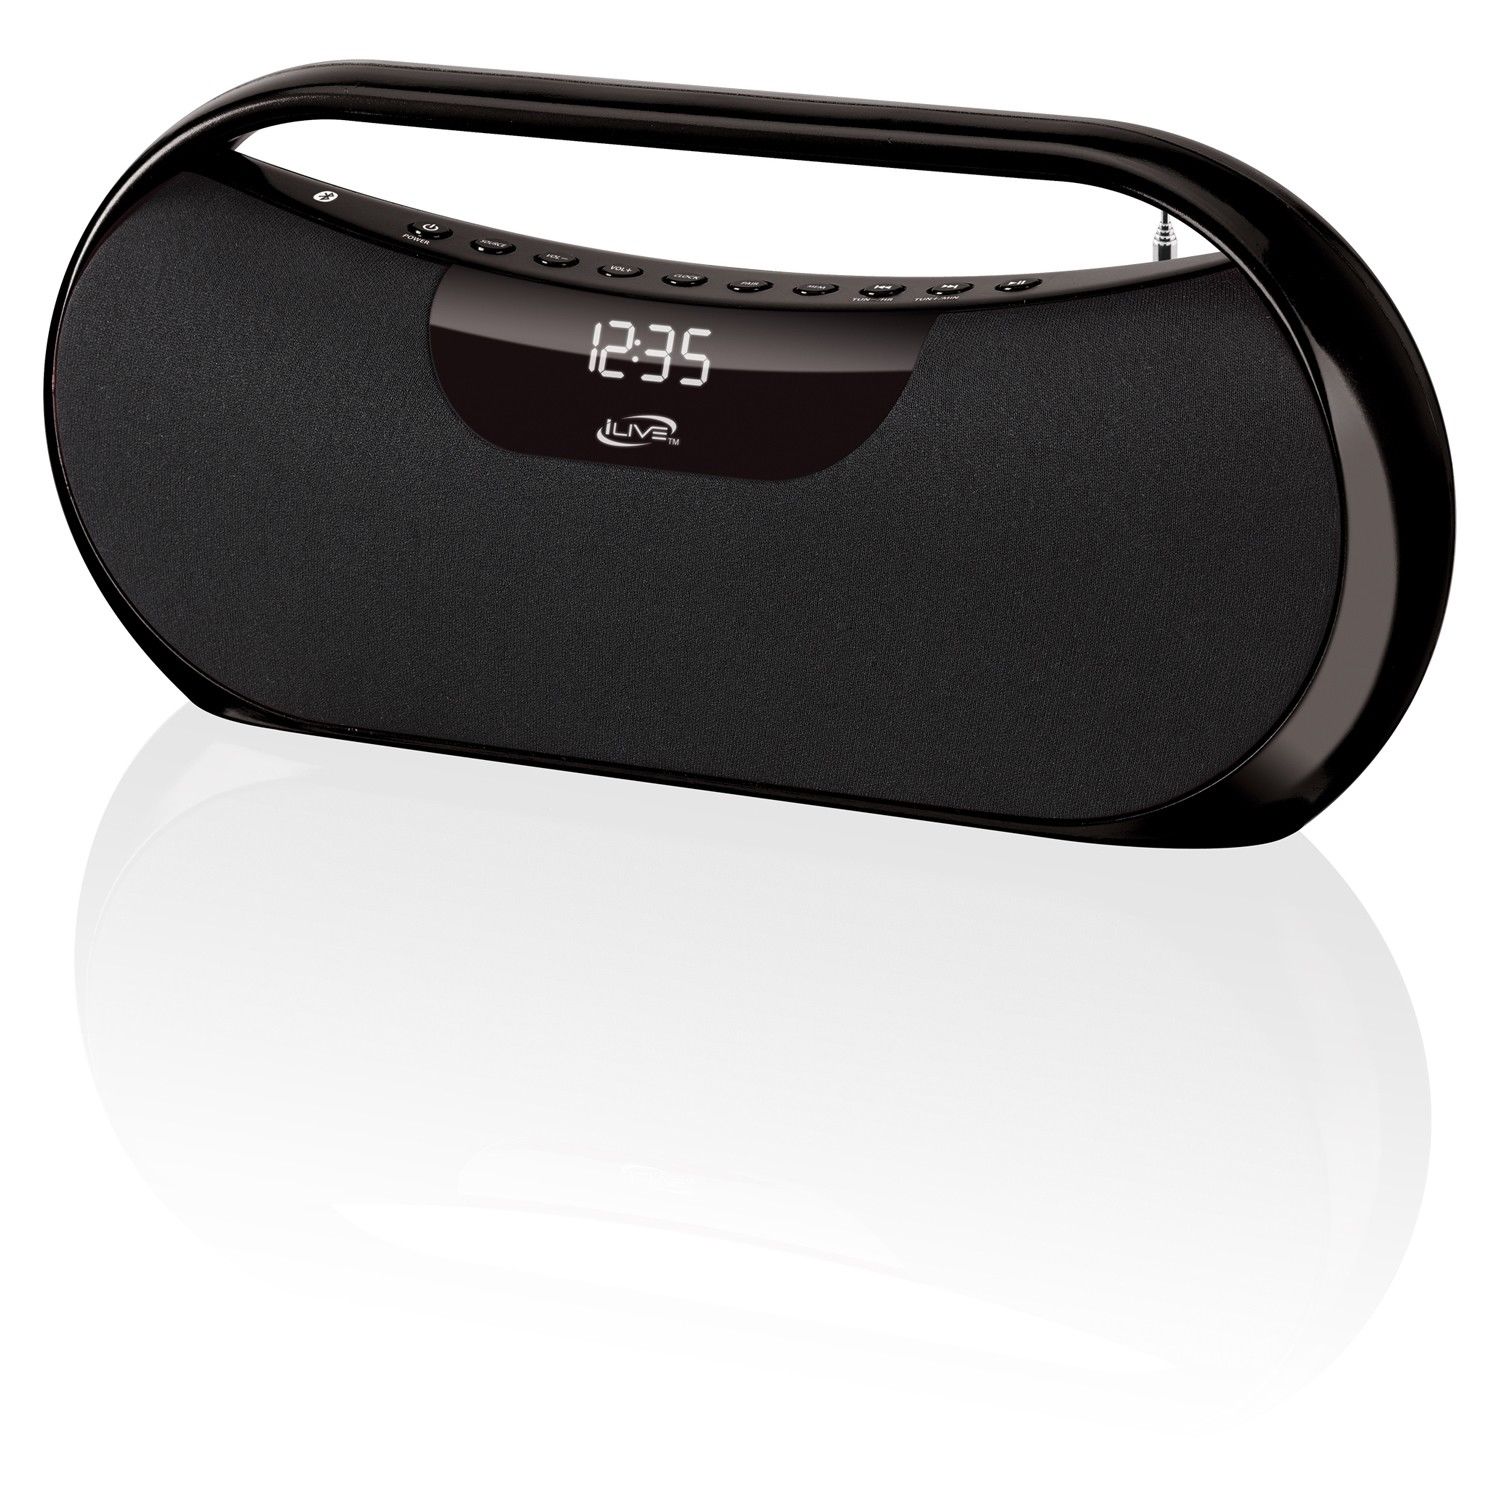 iLive Bluetooth portable boombox for $20, free shipping